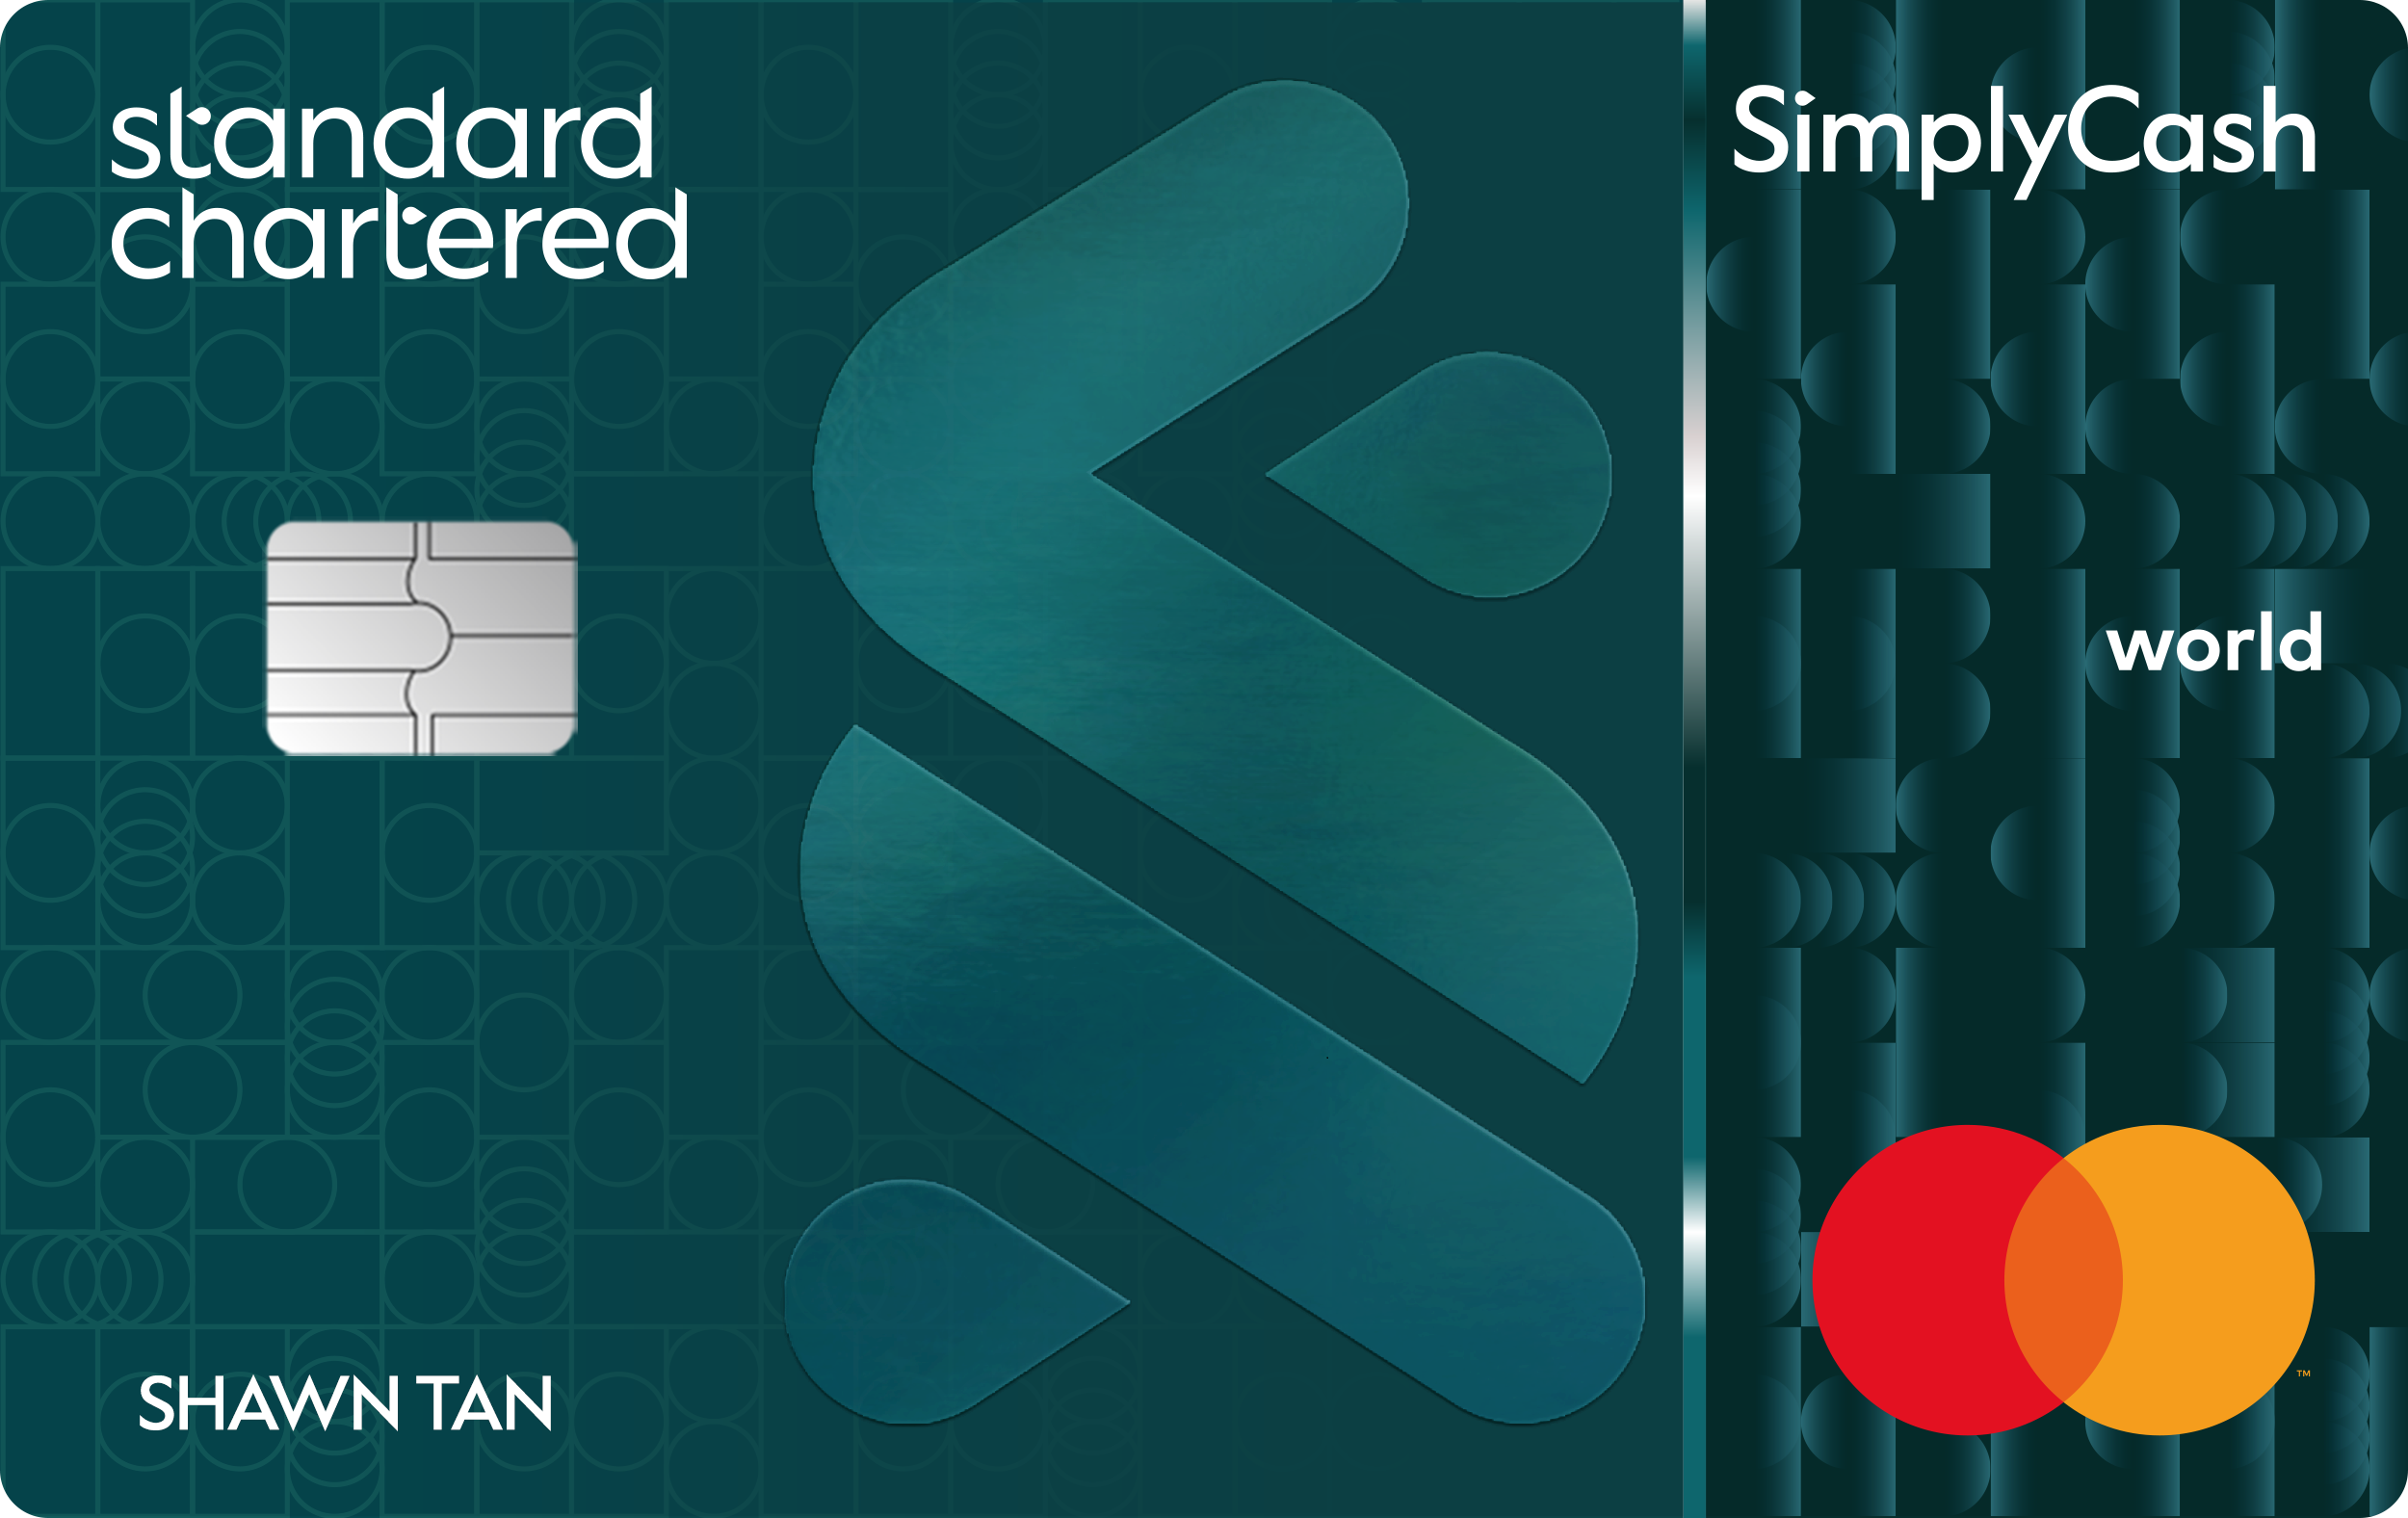 Standard Chartered Simply Cash Credit Card